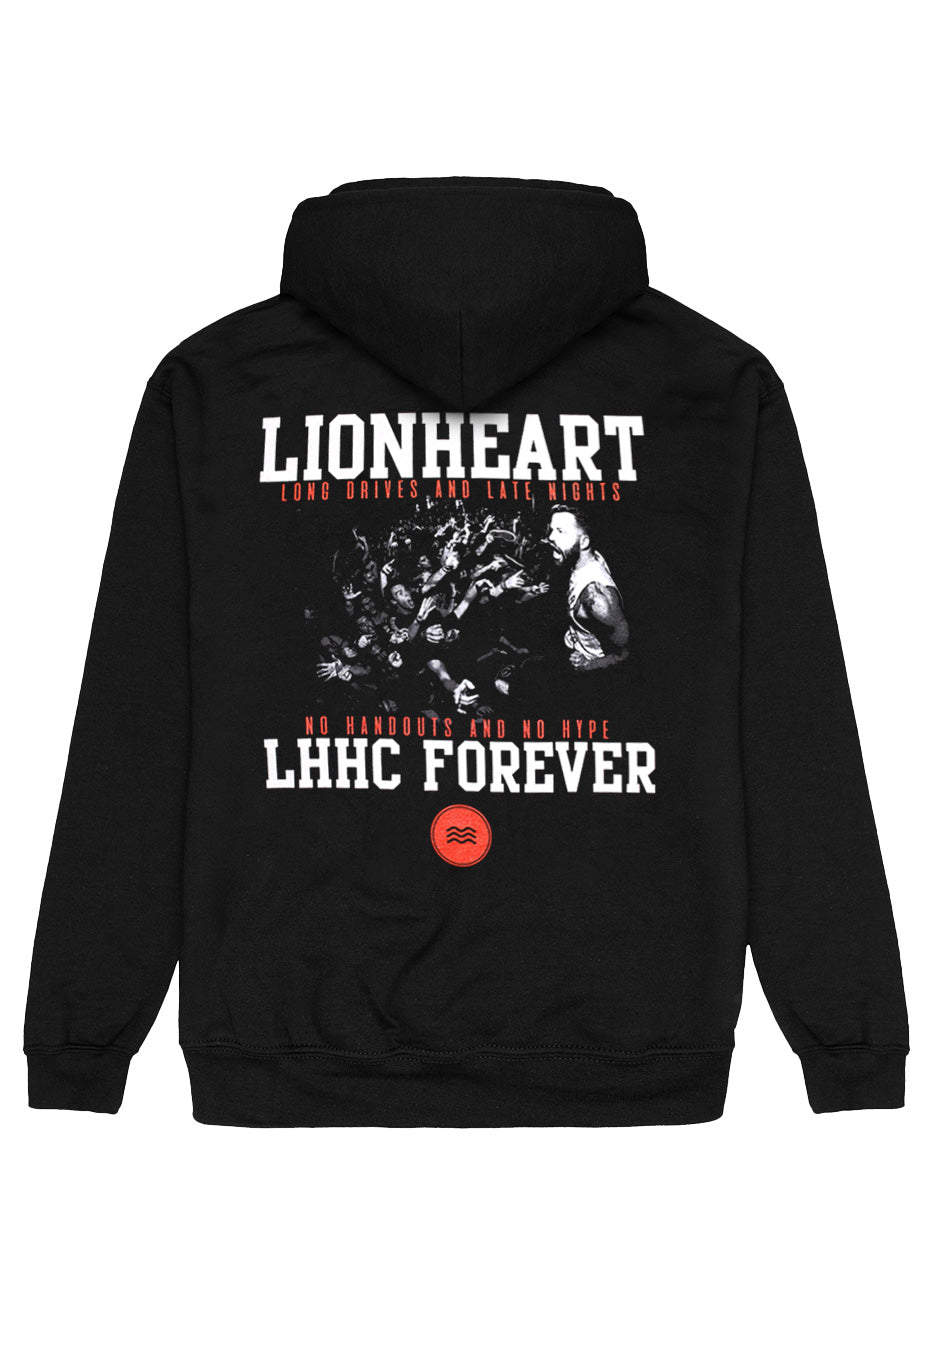 Lionheart - LHHC Forever - Hoodie